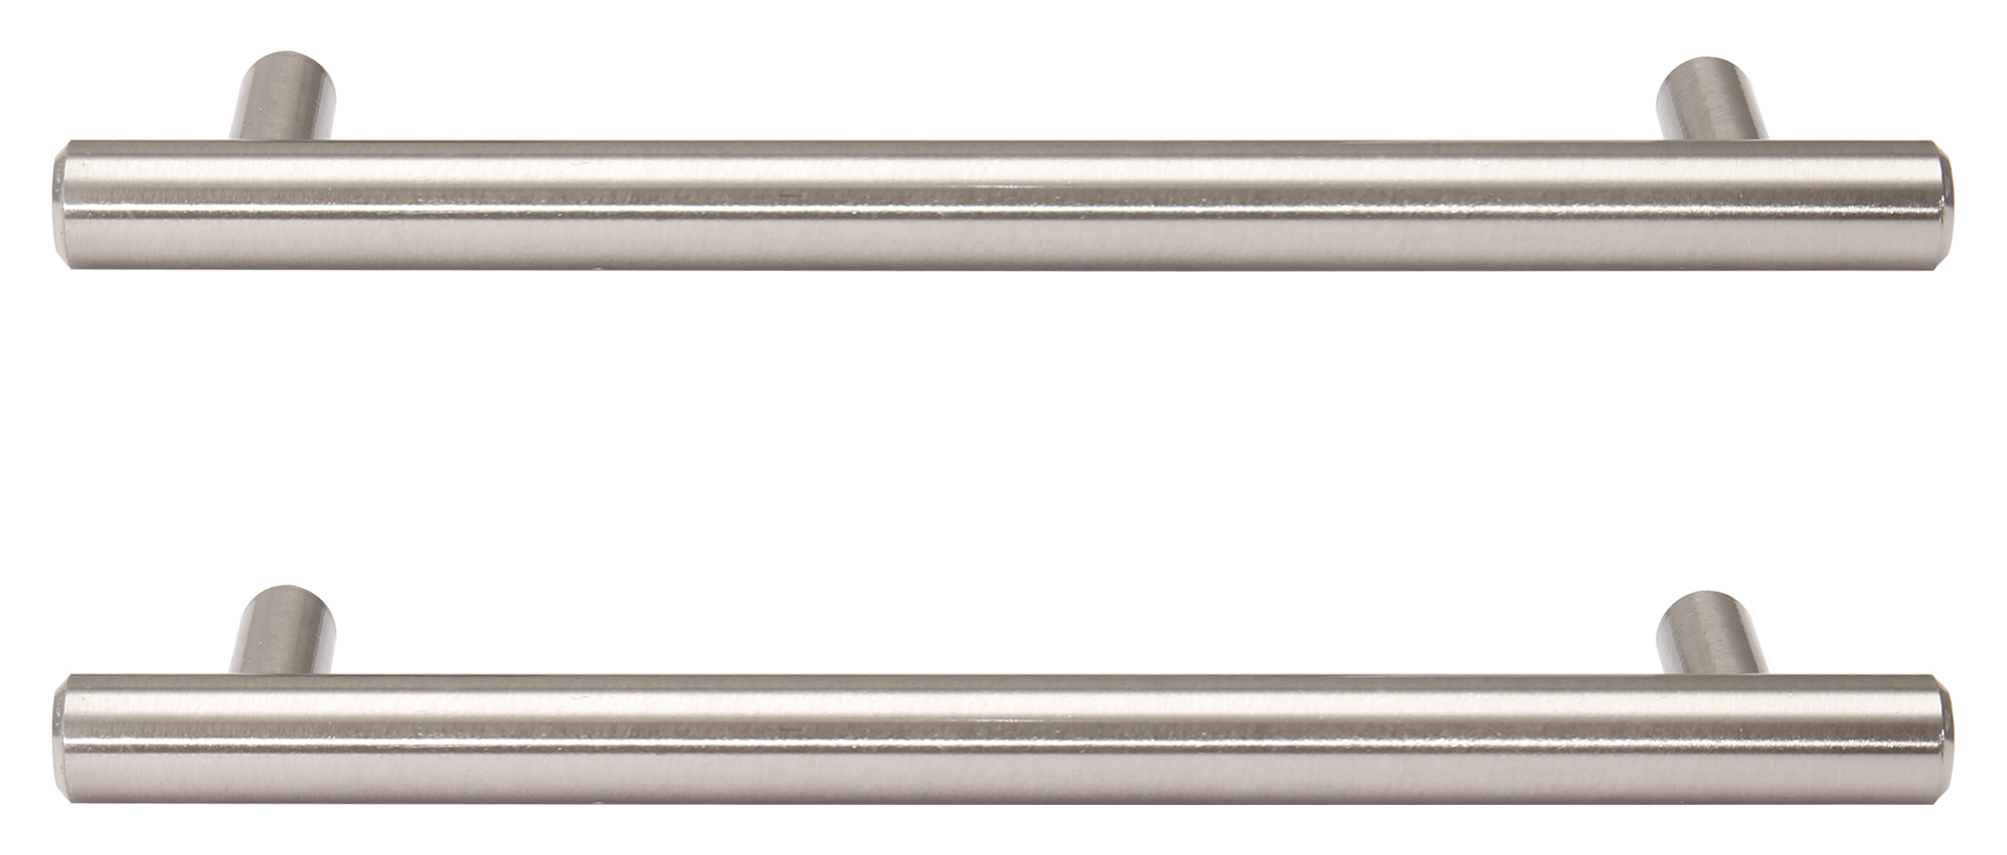 T Bar Cabinet Handle Brushed Nickel 220mm - Pack of 2